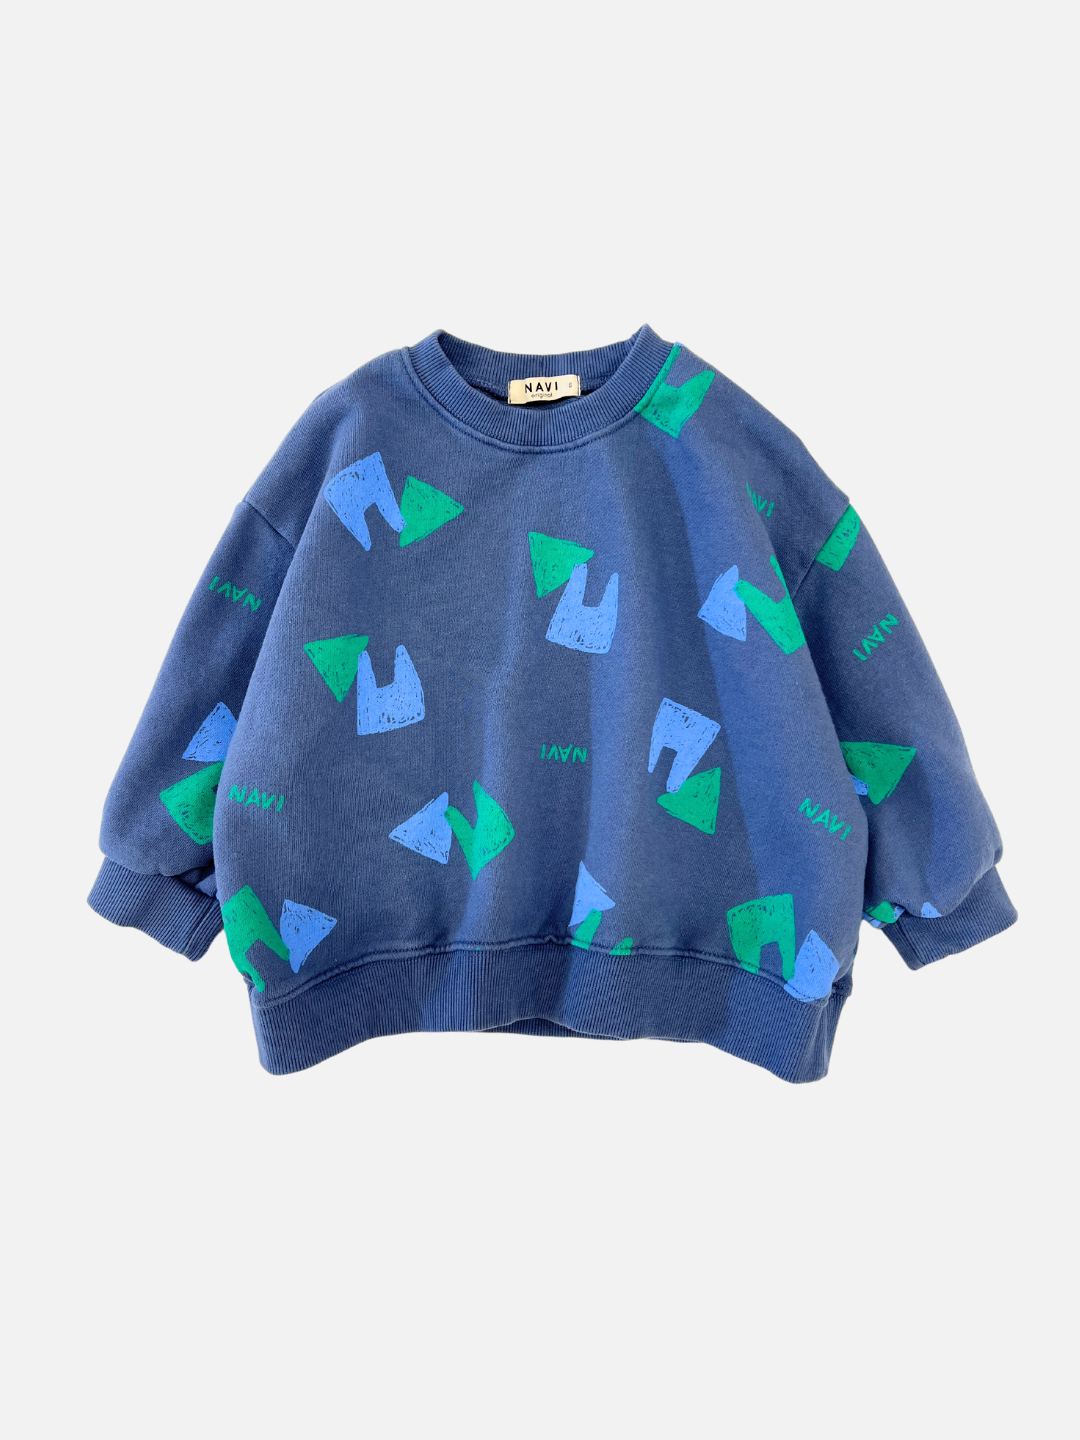 Front view of kids blue crewneck sweatshirt with an all over pattern of green and blue shapes and the brand name Navi.